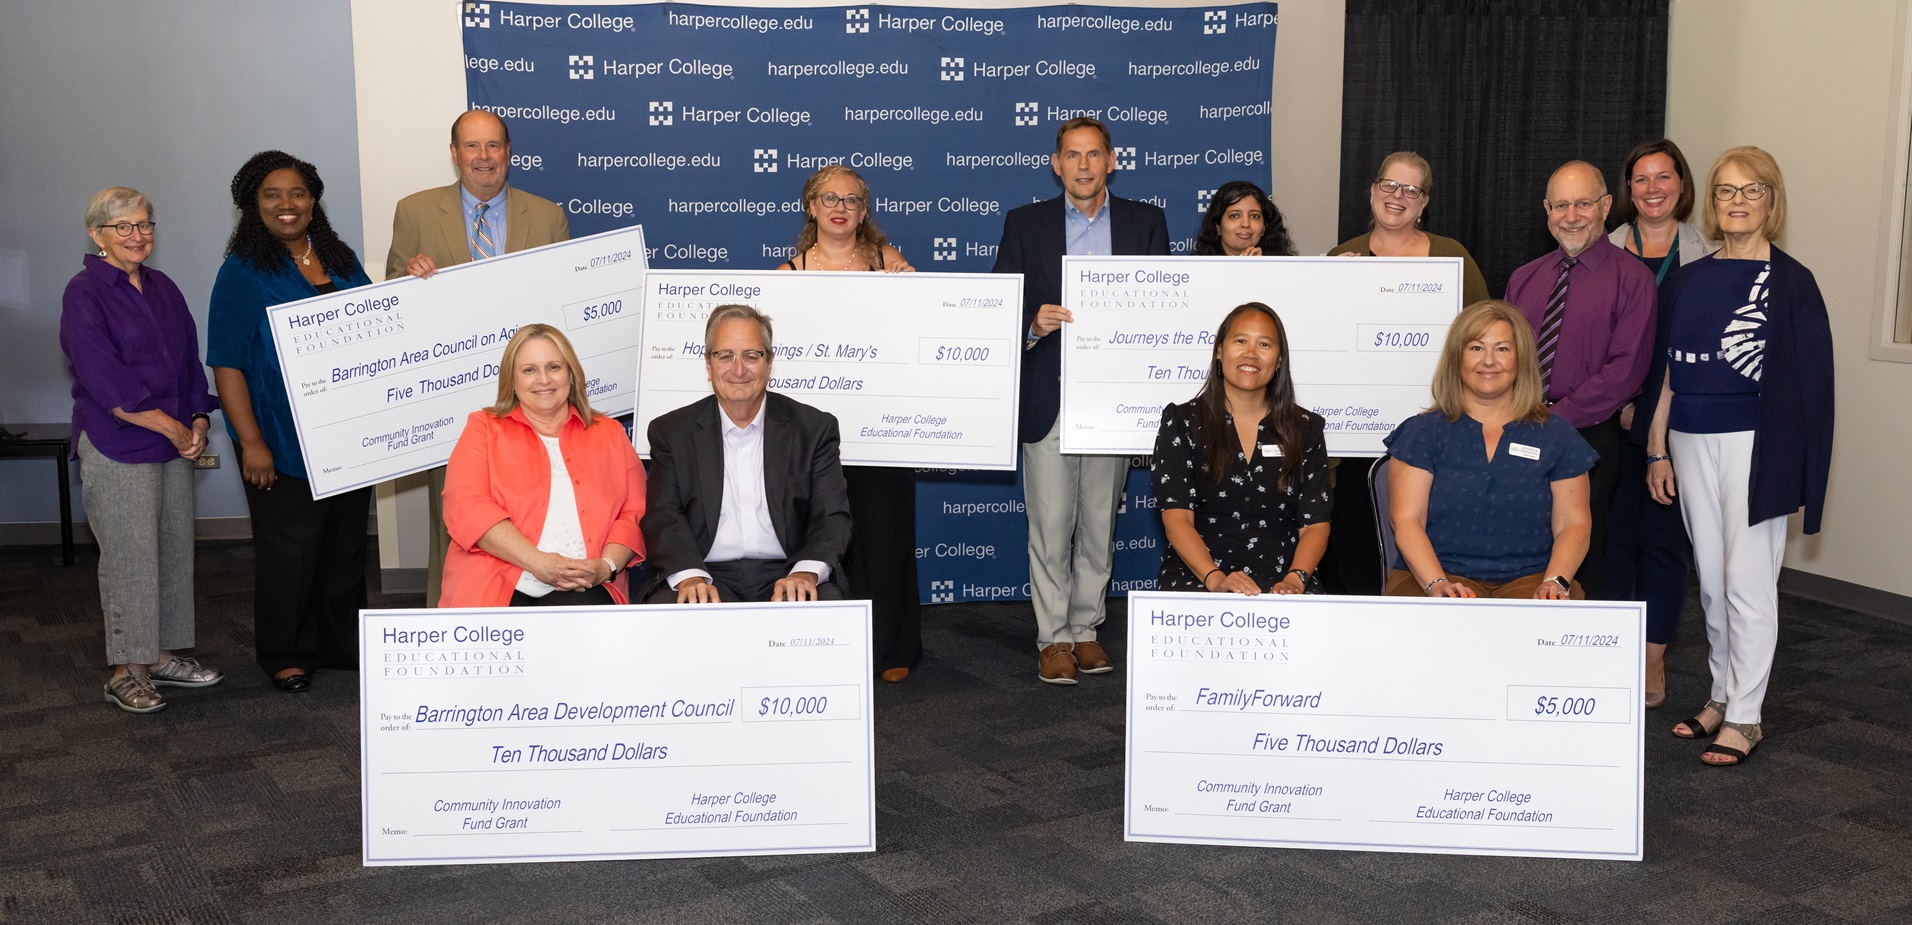 Community Innovation Fund Grant recipients pose with their commemorative checks from the Harper College Educational Foundation